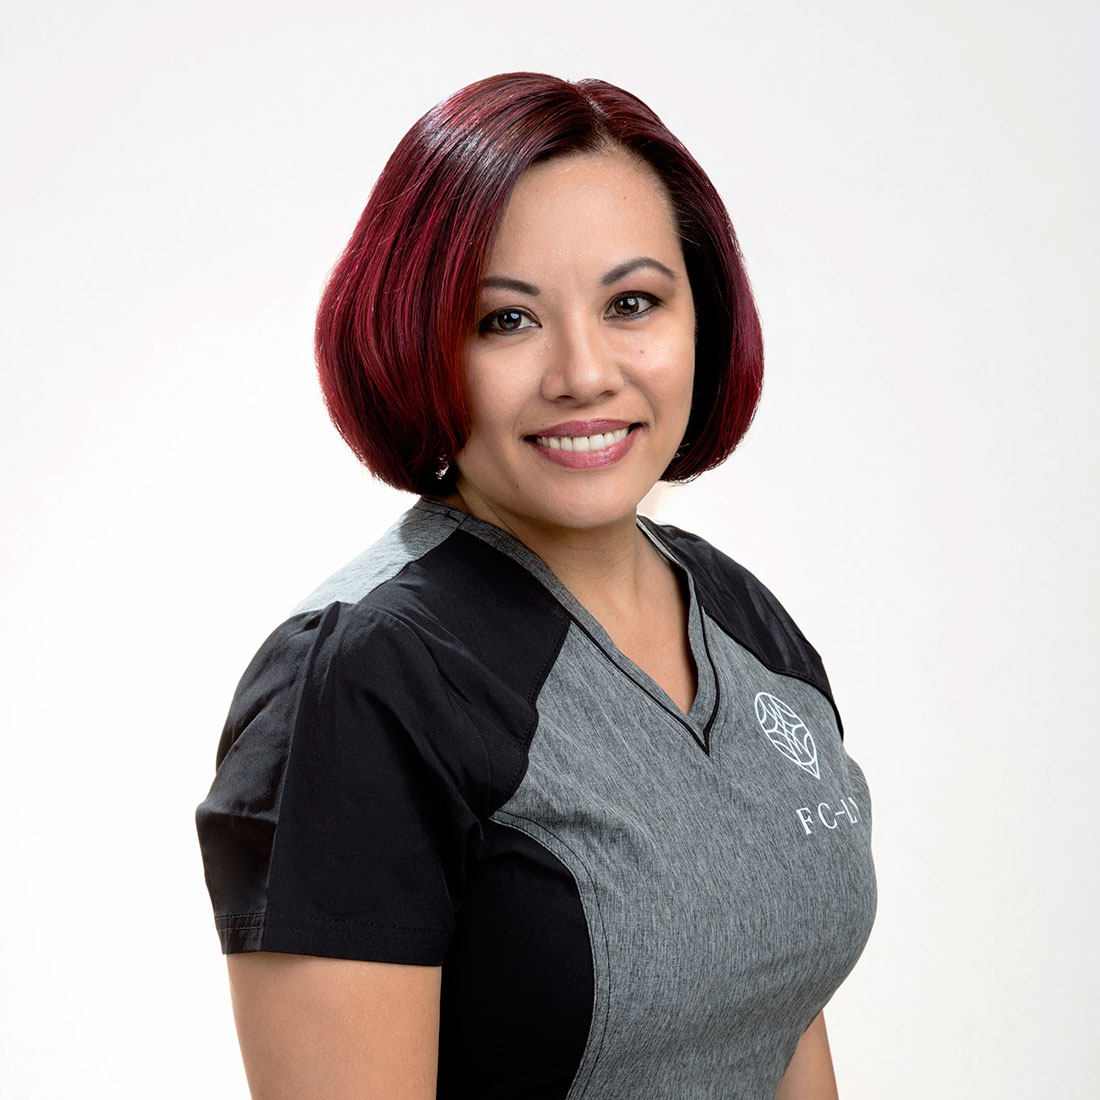 Arlyn Garcia coordinates IVF for egg donors and gestational carriers